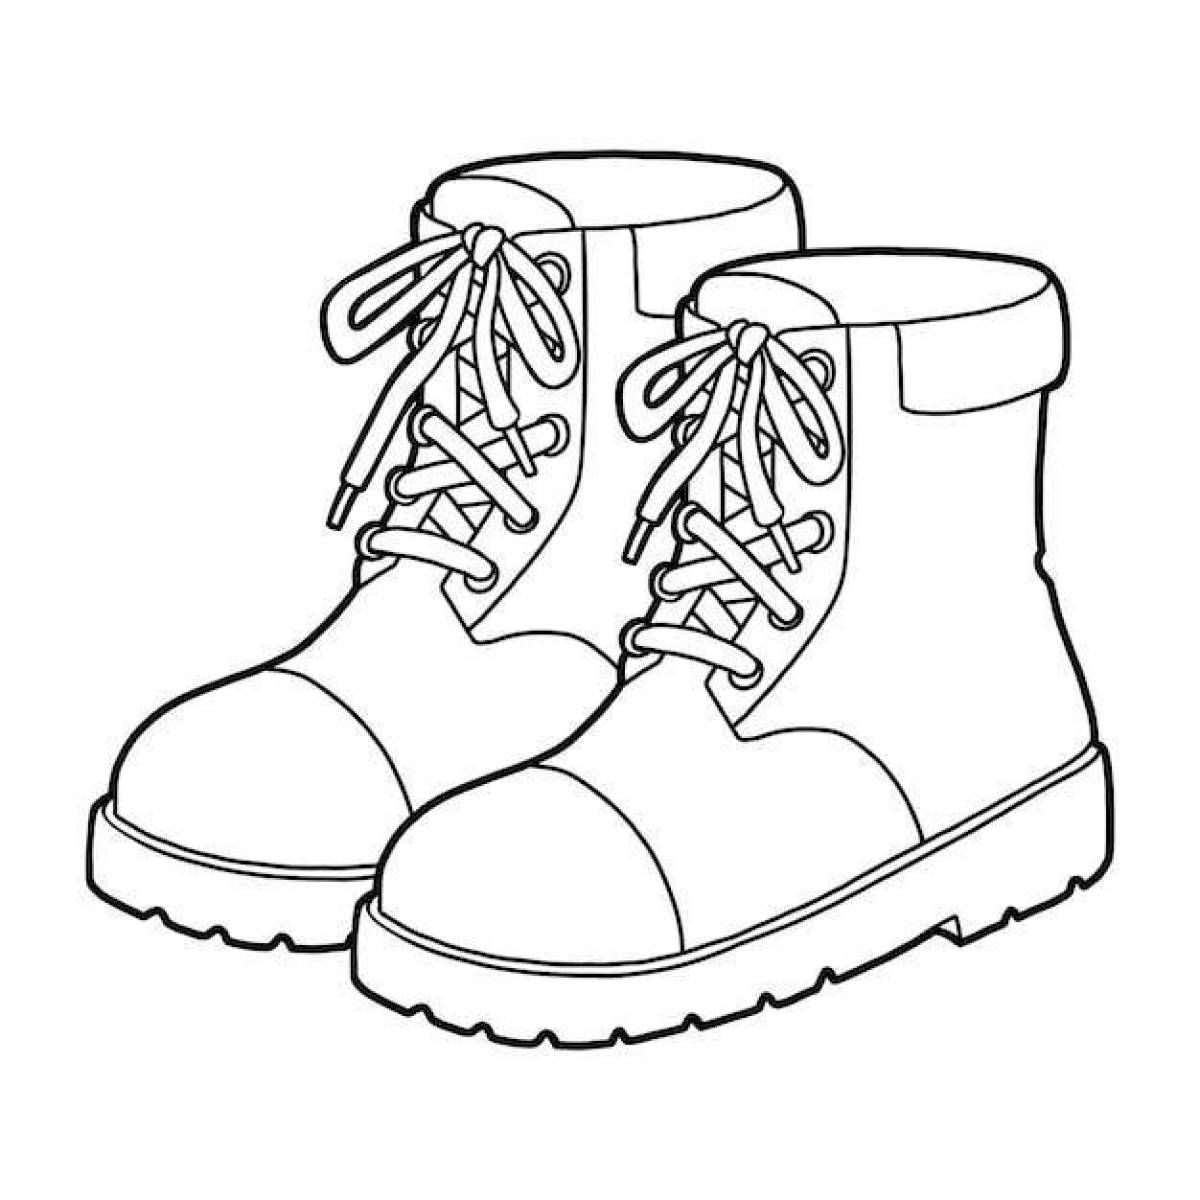 Bright boots coloring for children